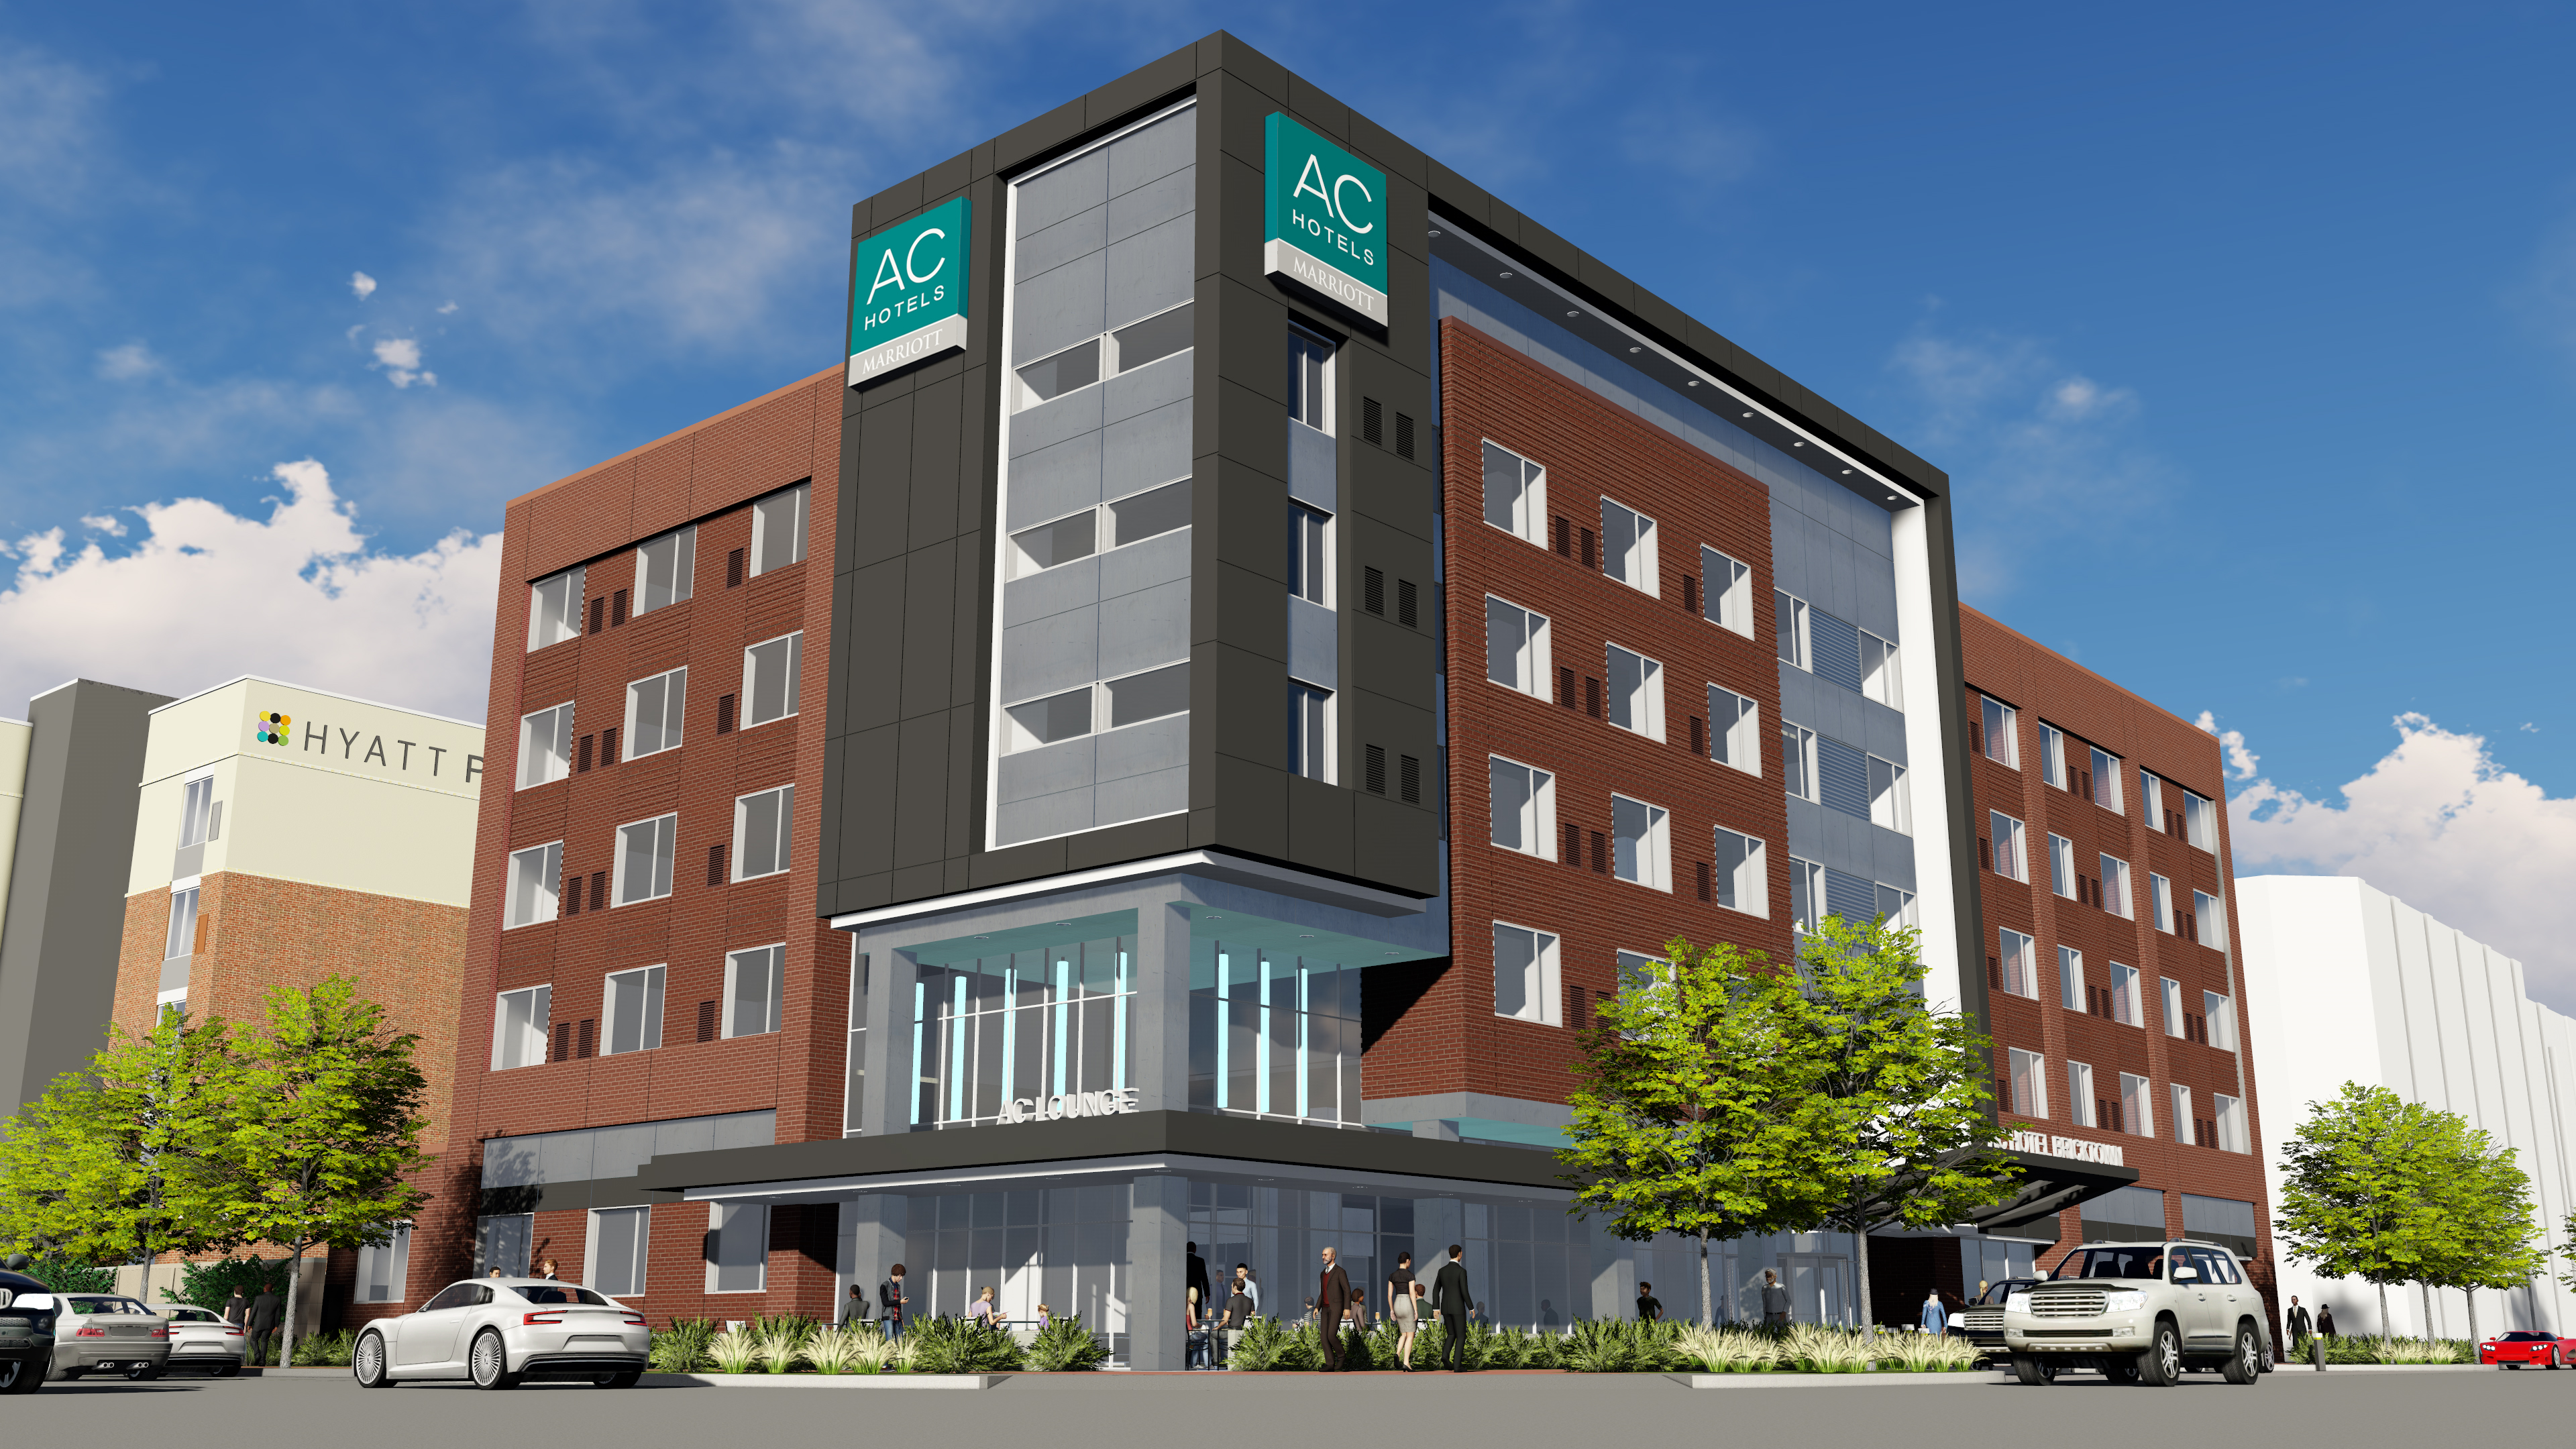 Rendering of the first Oklahoma City hotel project to use modular construction, dramatically reducing build time to meet increasing hotel room demand.